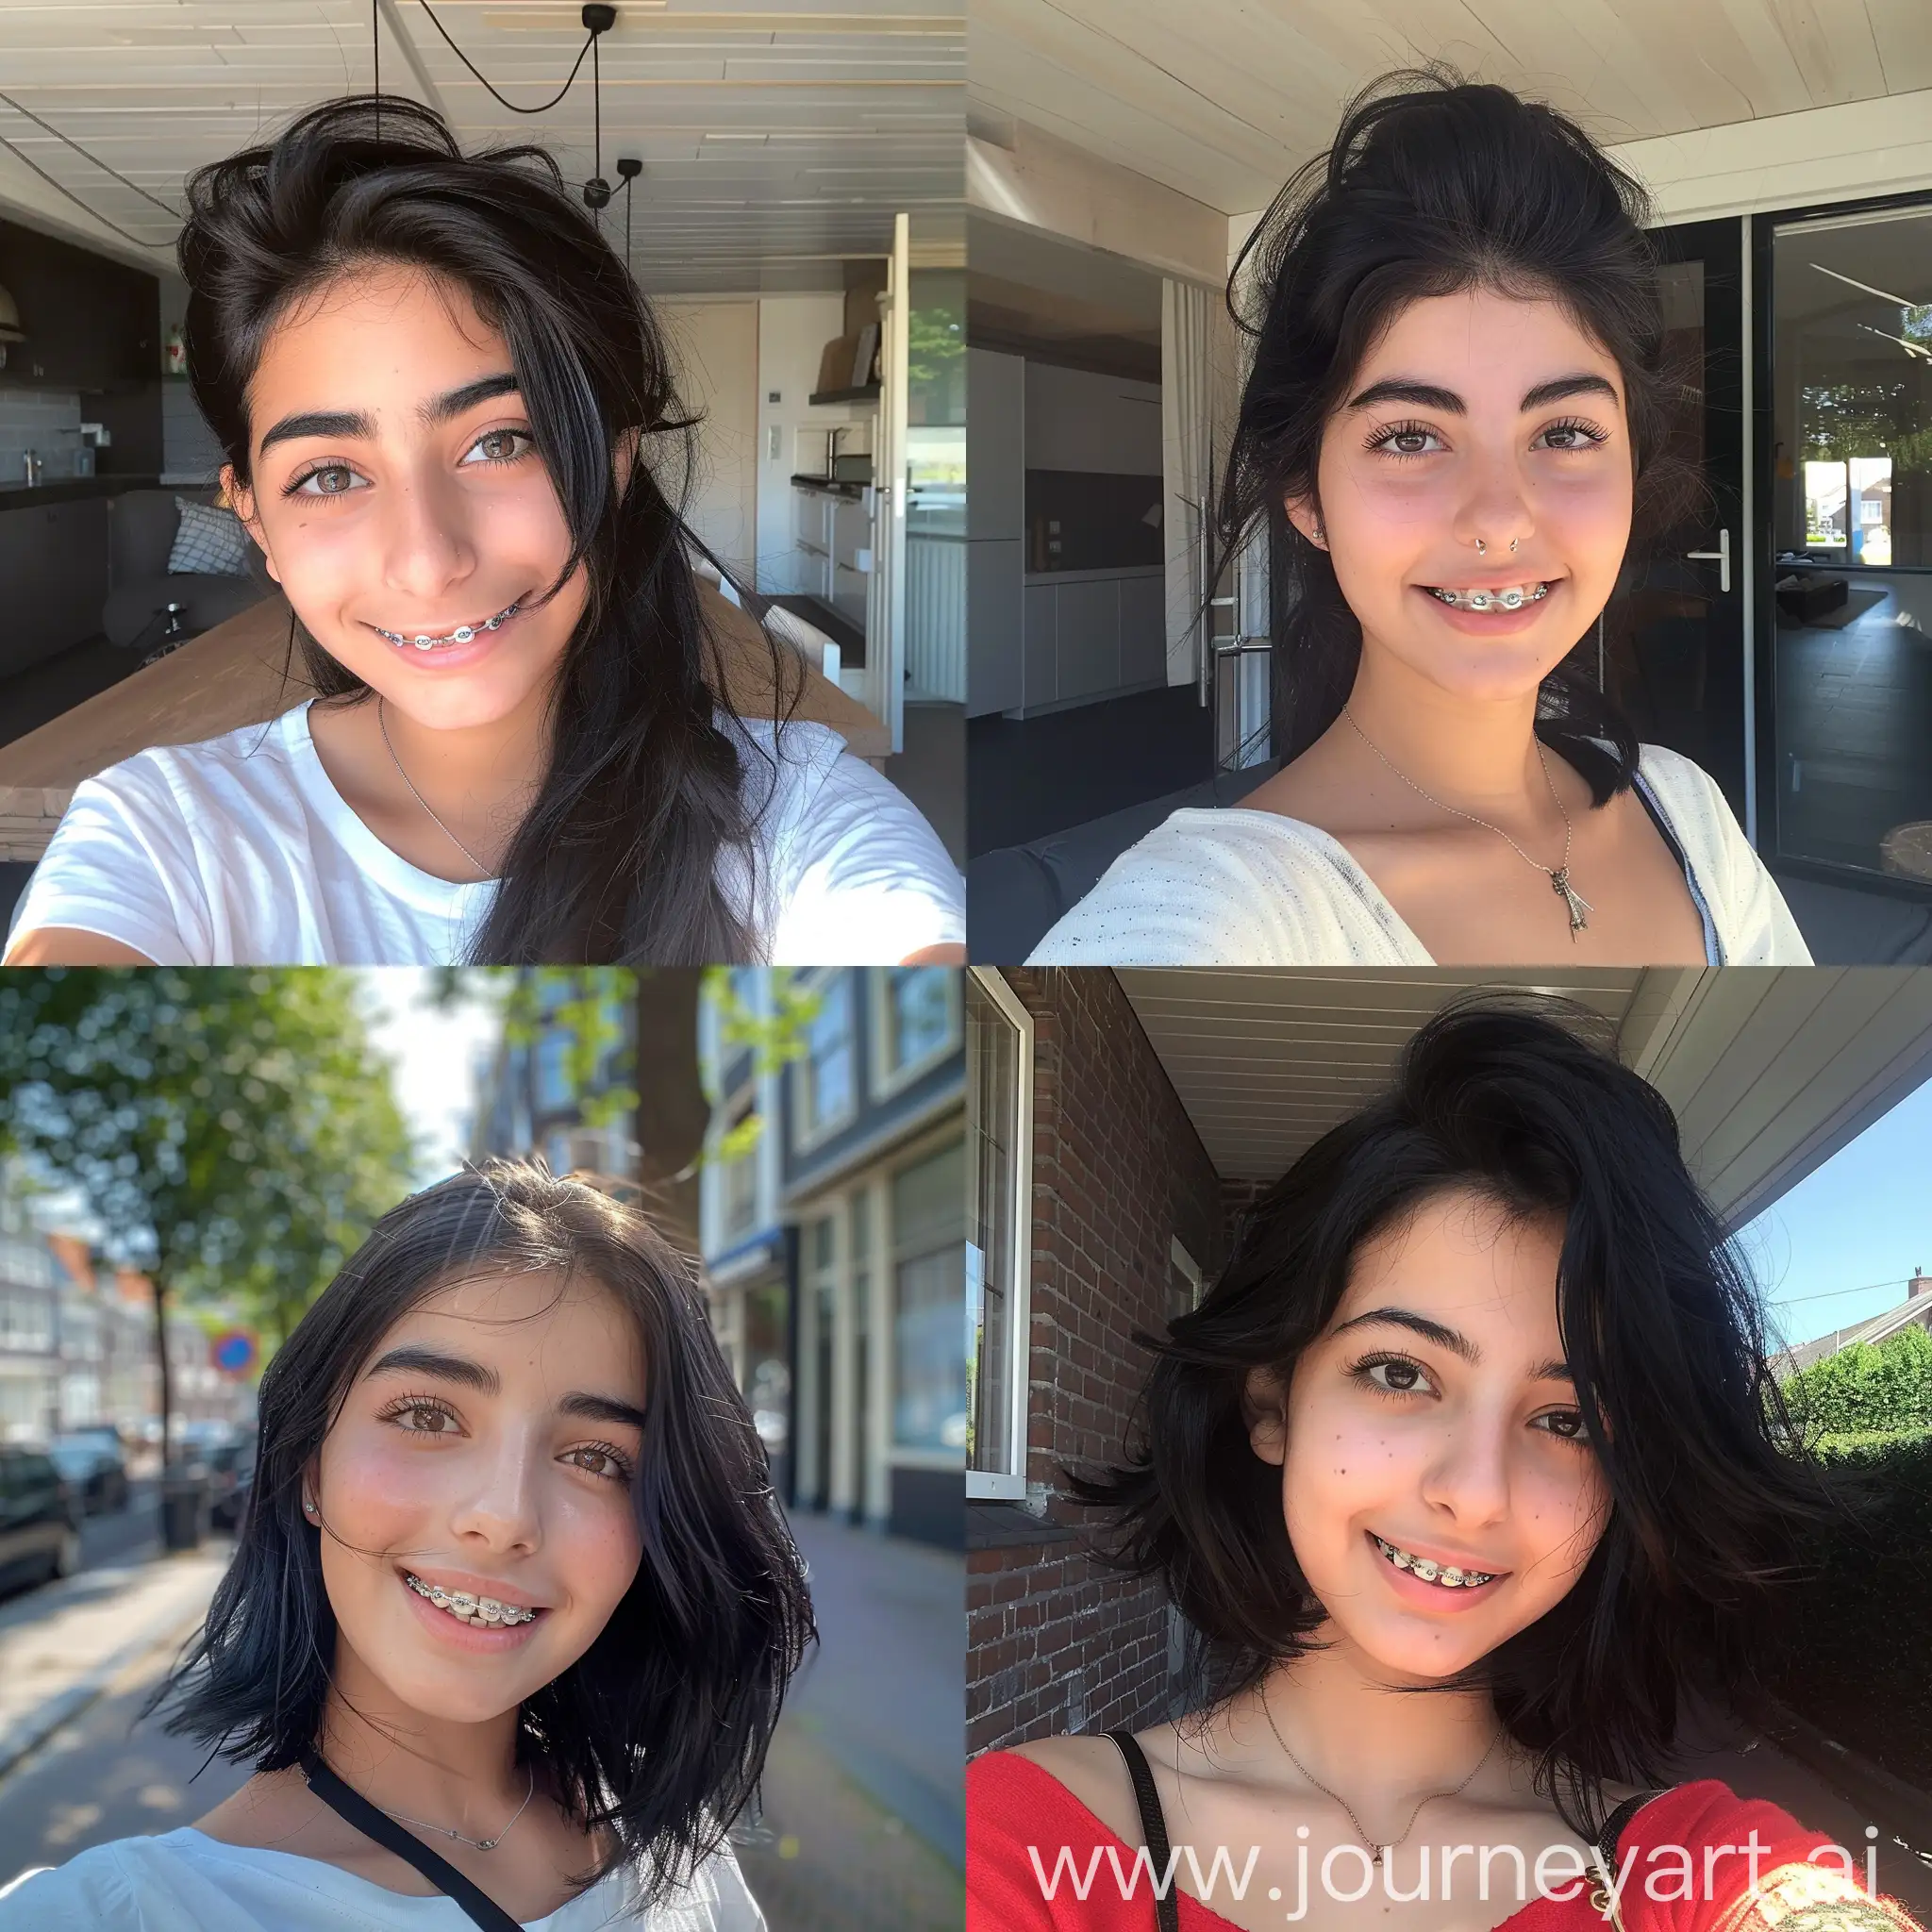 Smiling-Latina-Turkish-Girl-with-Braces-Captures-Summer-Vibes-in-Rotterdam-South